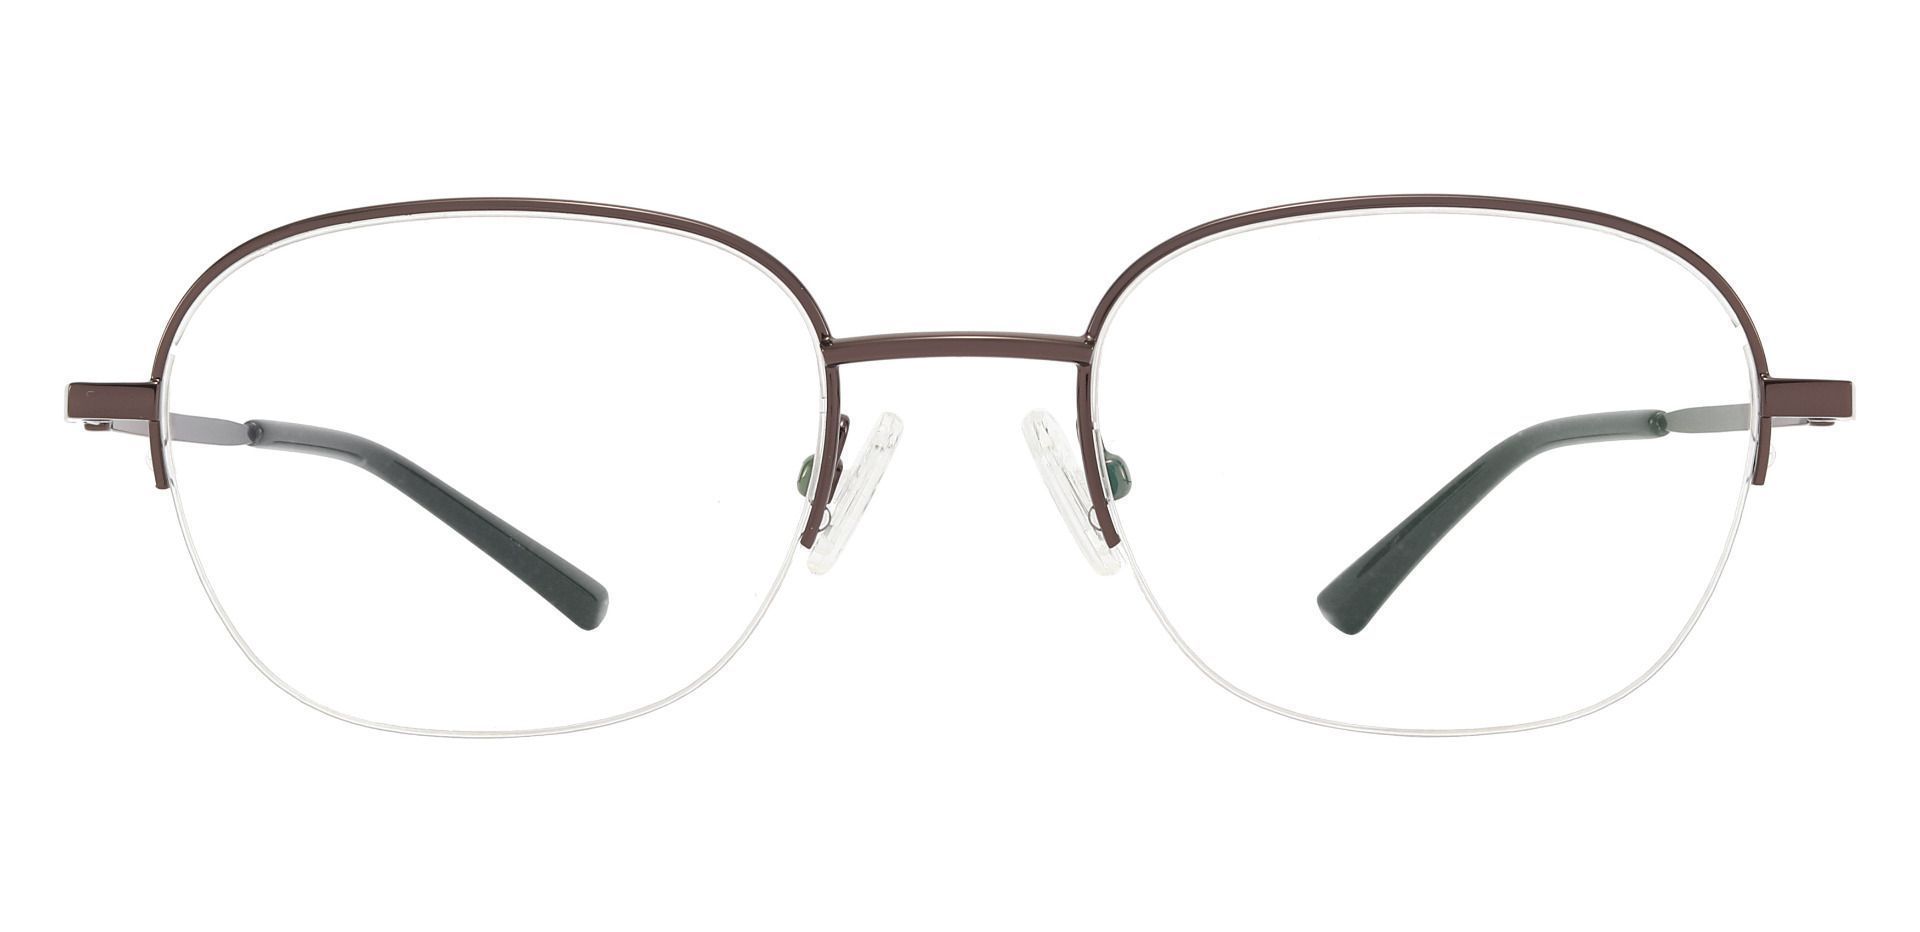 Rochester Oval Lined Bifocal Glasses - Brown